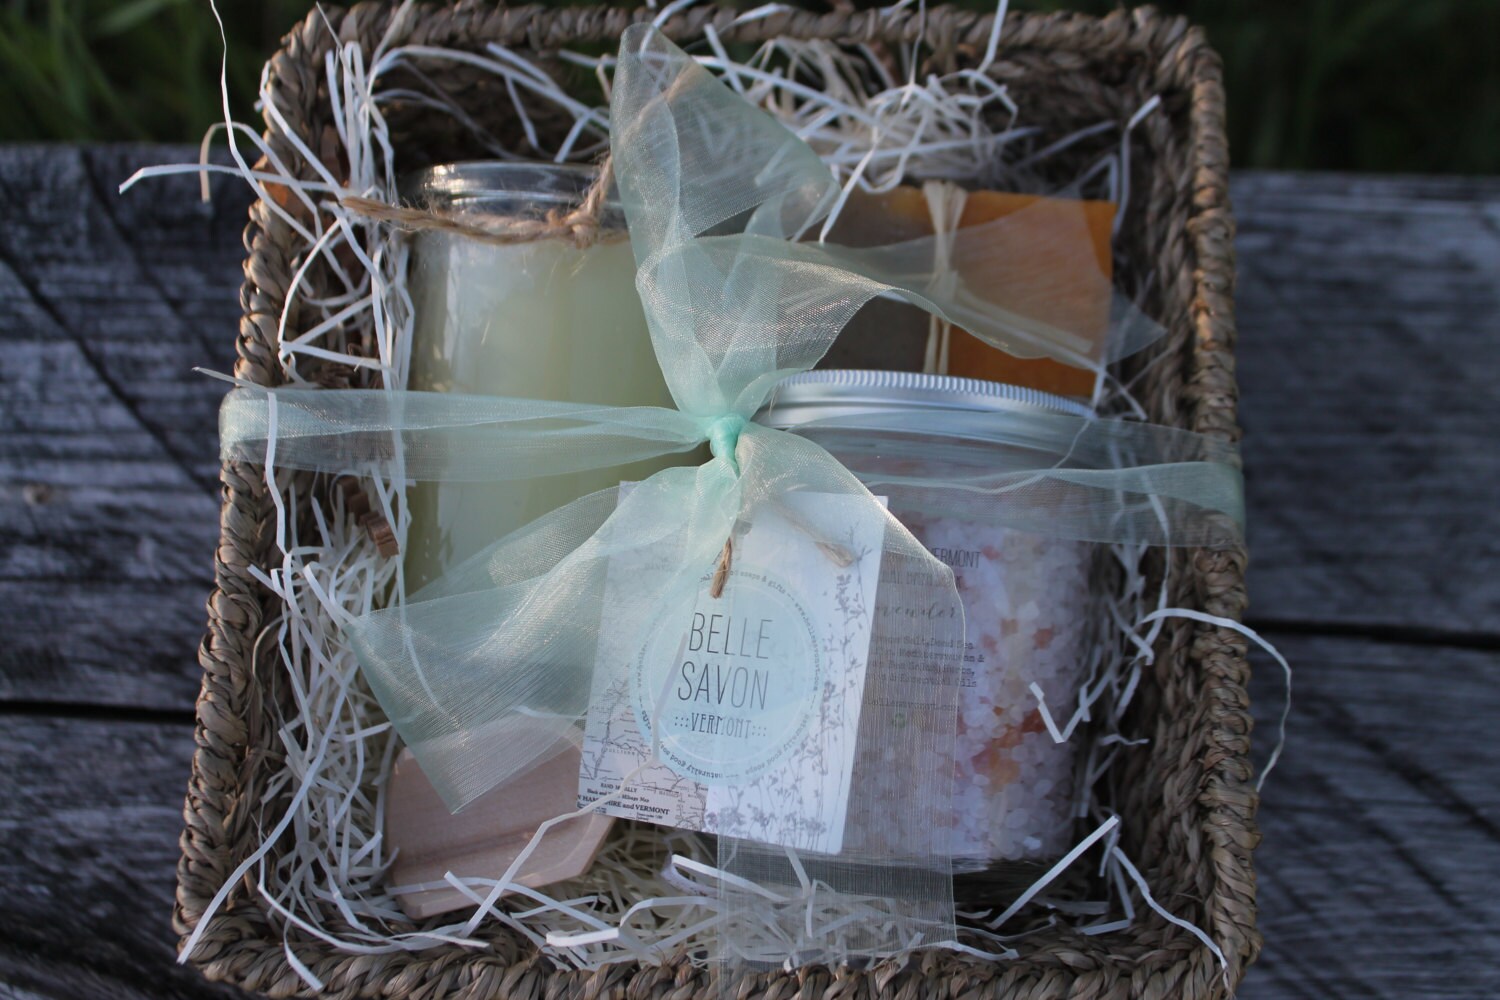 Seagrass Basket Deluxe Gift Set-Spa Set-Bridesmaid Gift-Maid of Honor-Mother of the Bride Gift -Belle Savon Vermont